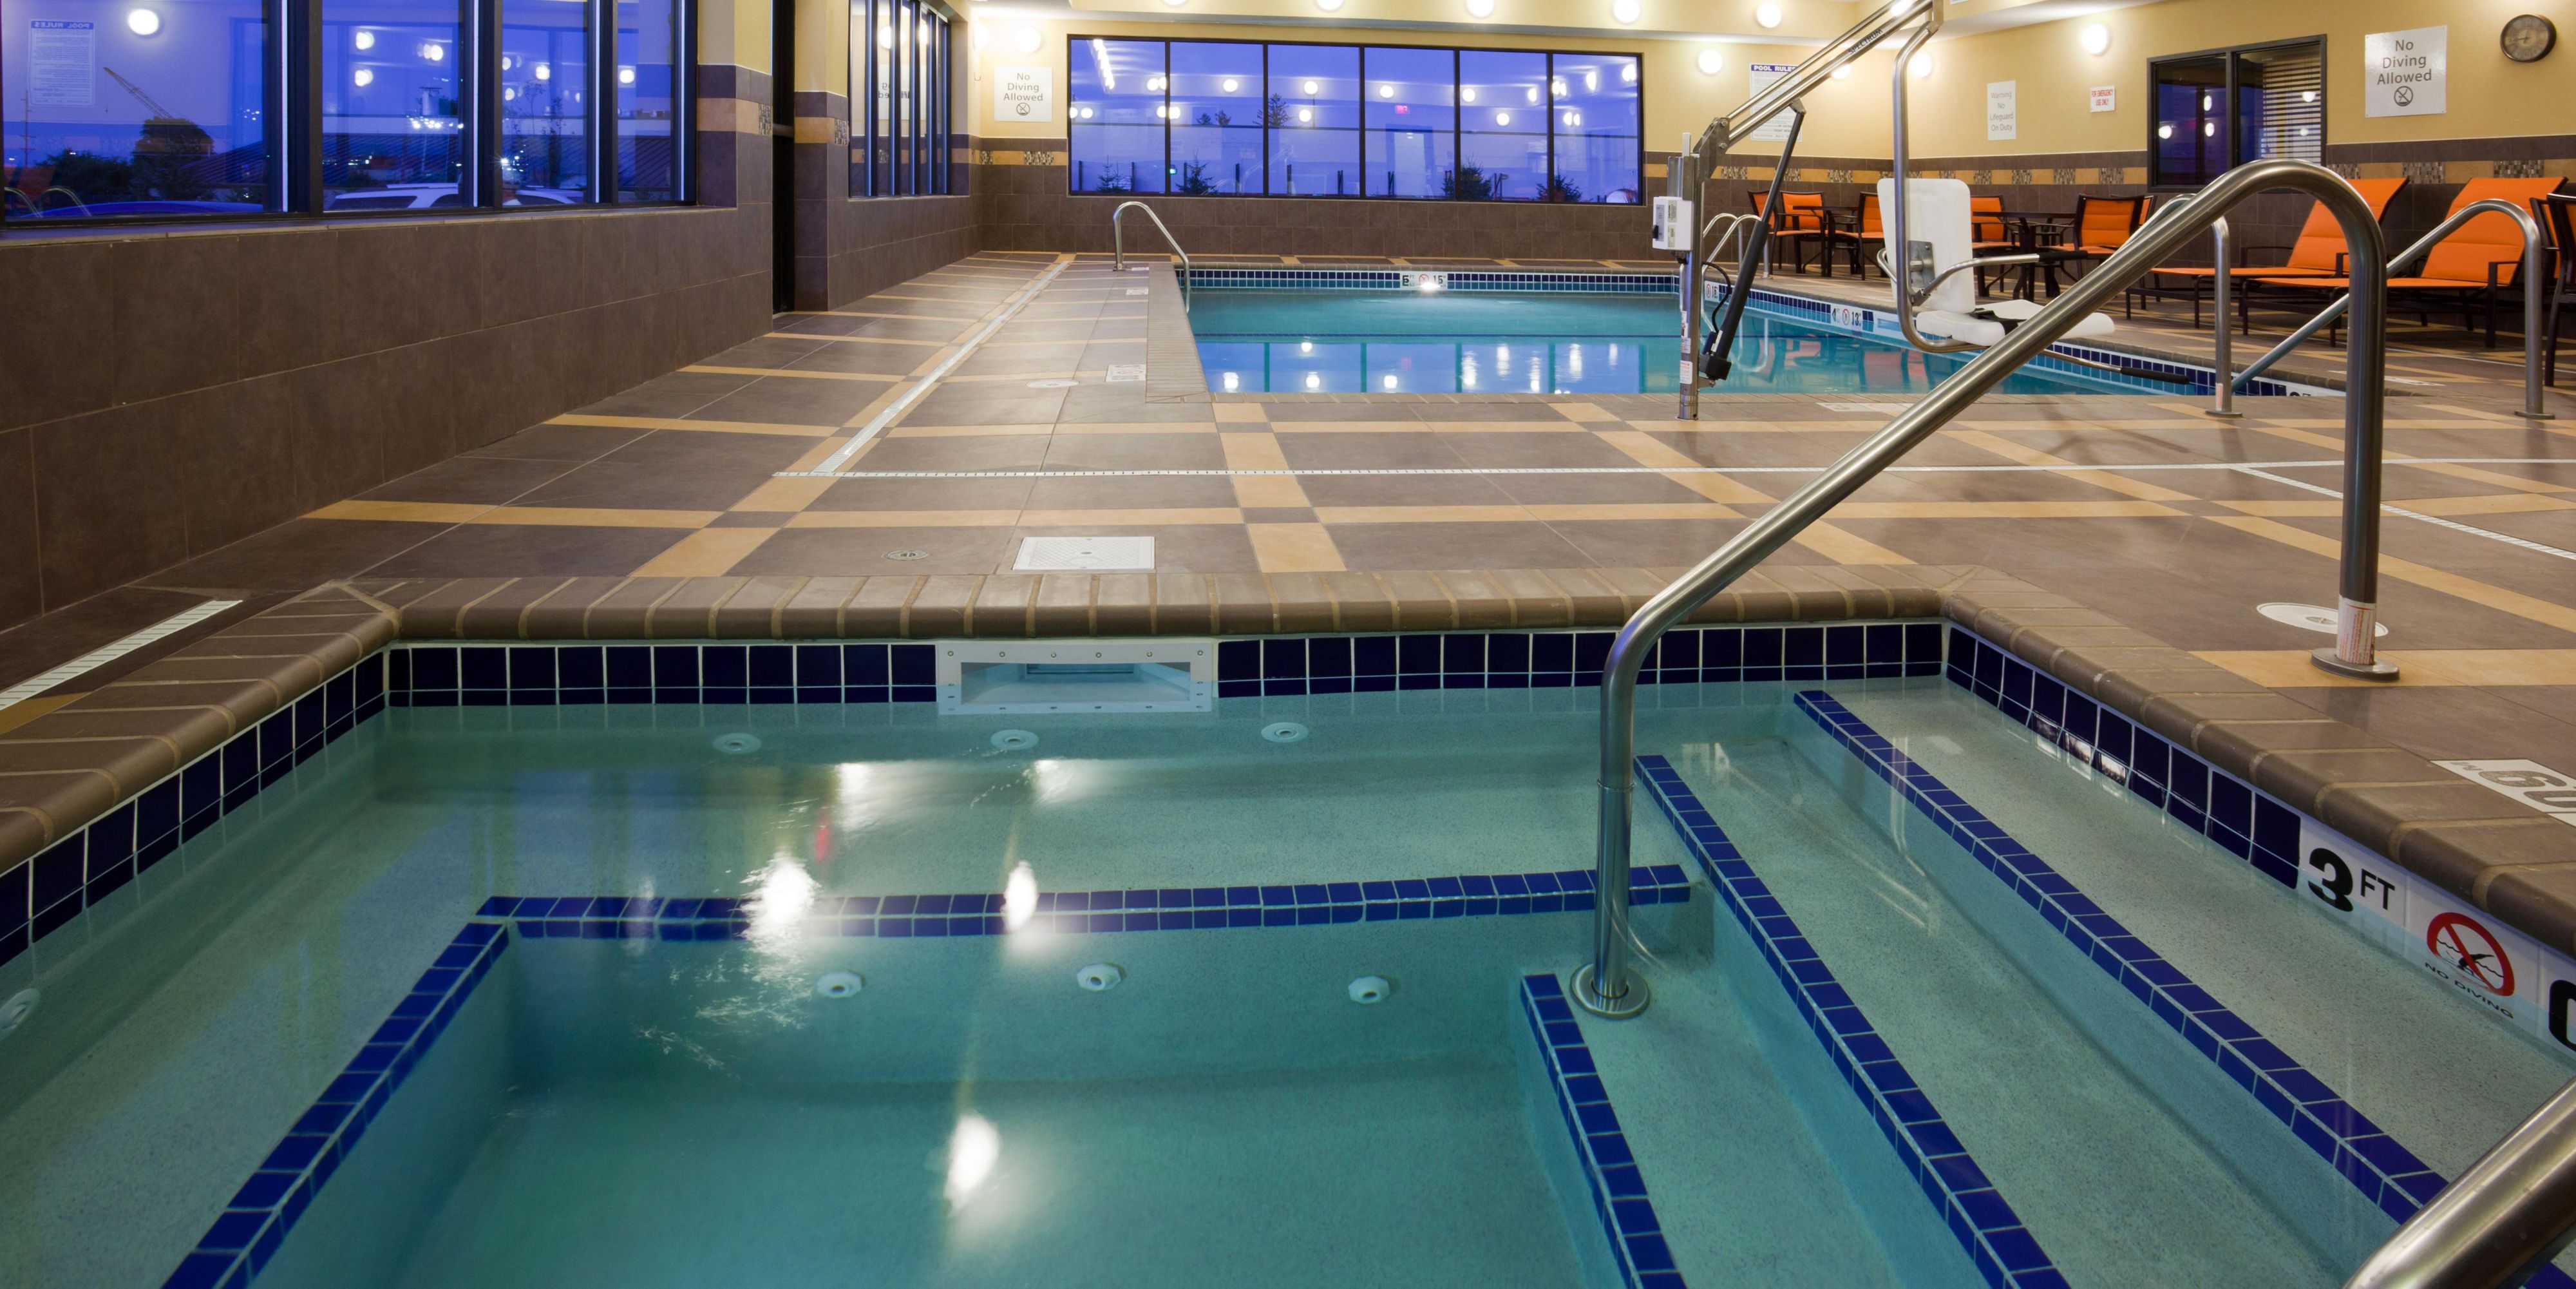 When staying with us, enjoy free use of our heated indoor pool and hot tub. If you need to get your workout in, use our complimentary fitness center complete with treadmills, elliptical, bike, free weights, and yoga mats.
